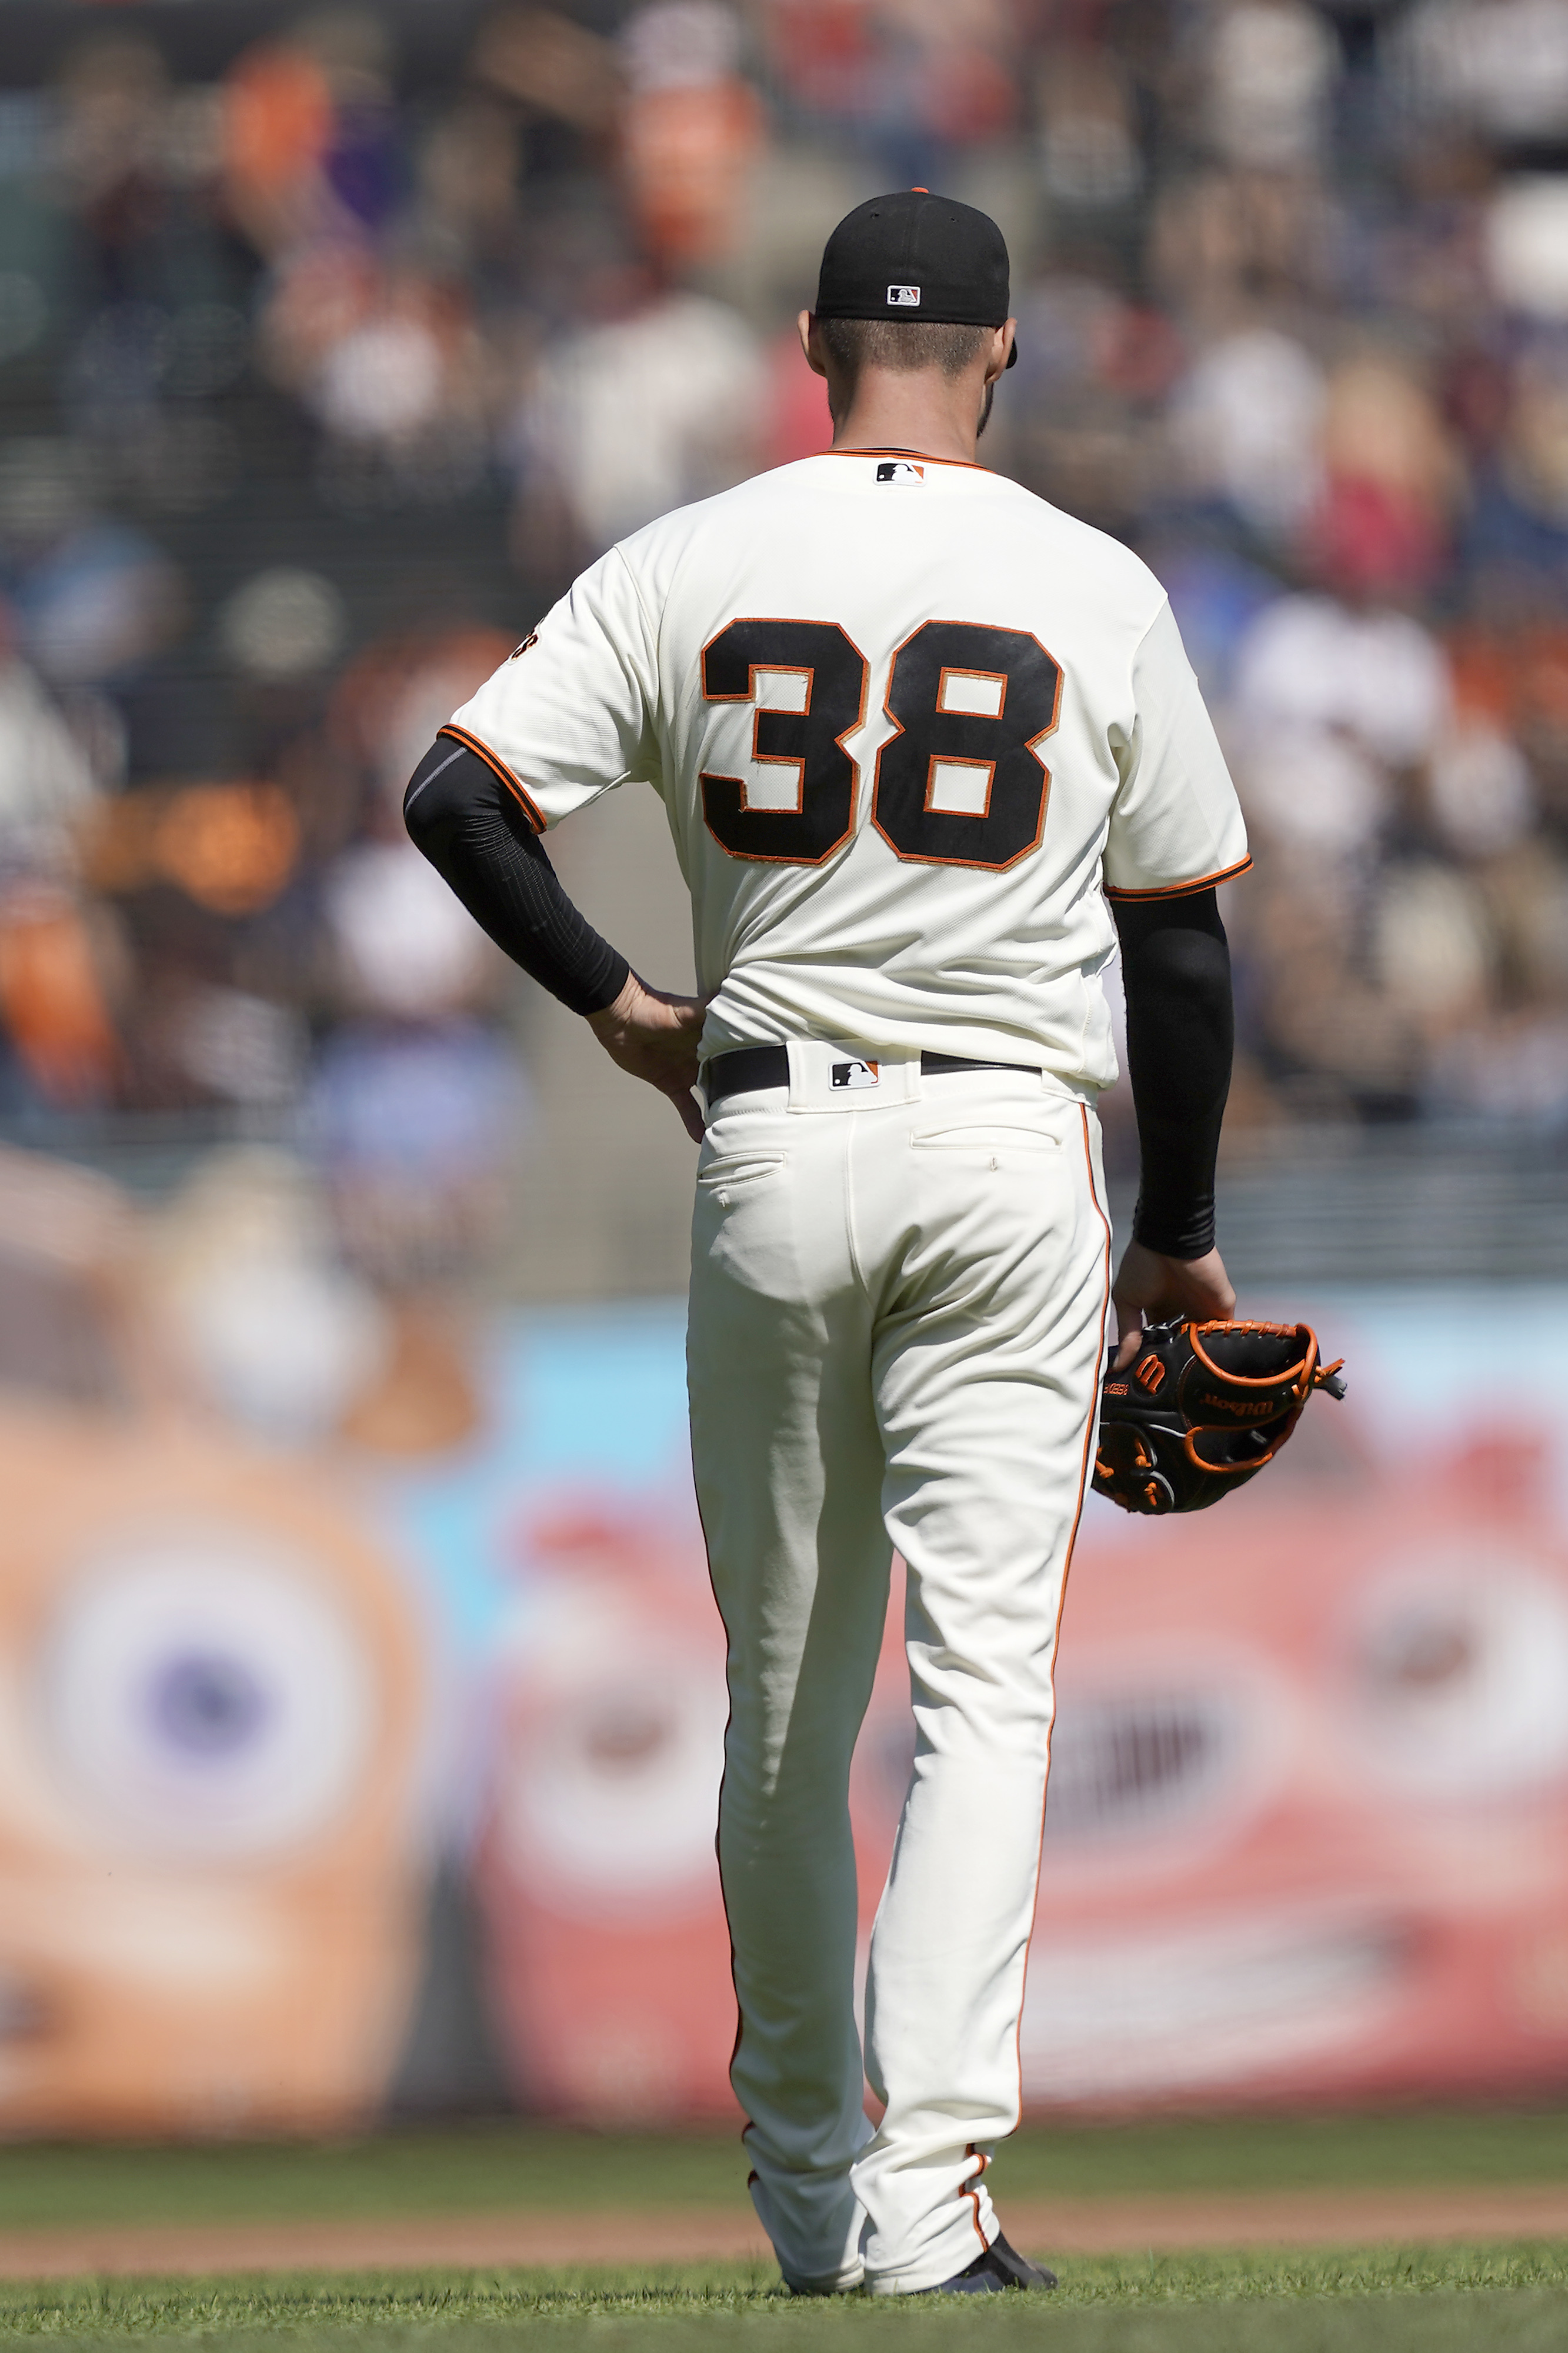 Beede hitless into 4th, then hurt as Giants top Rockies 8-3